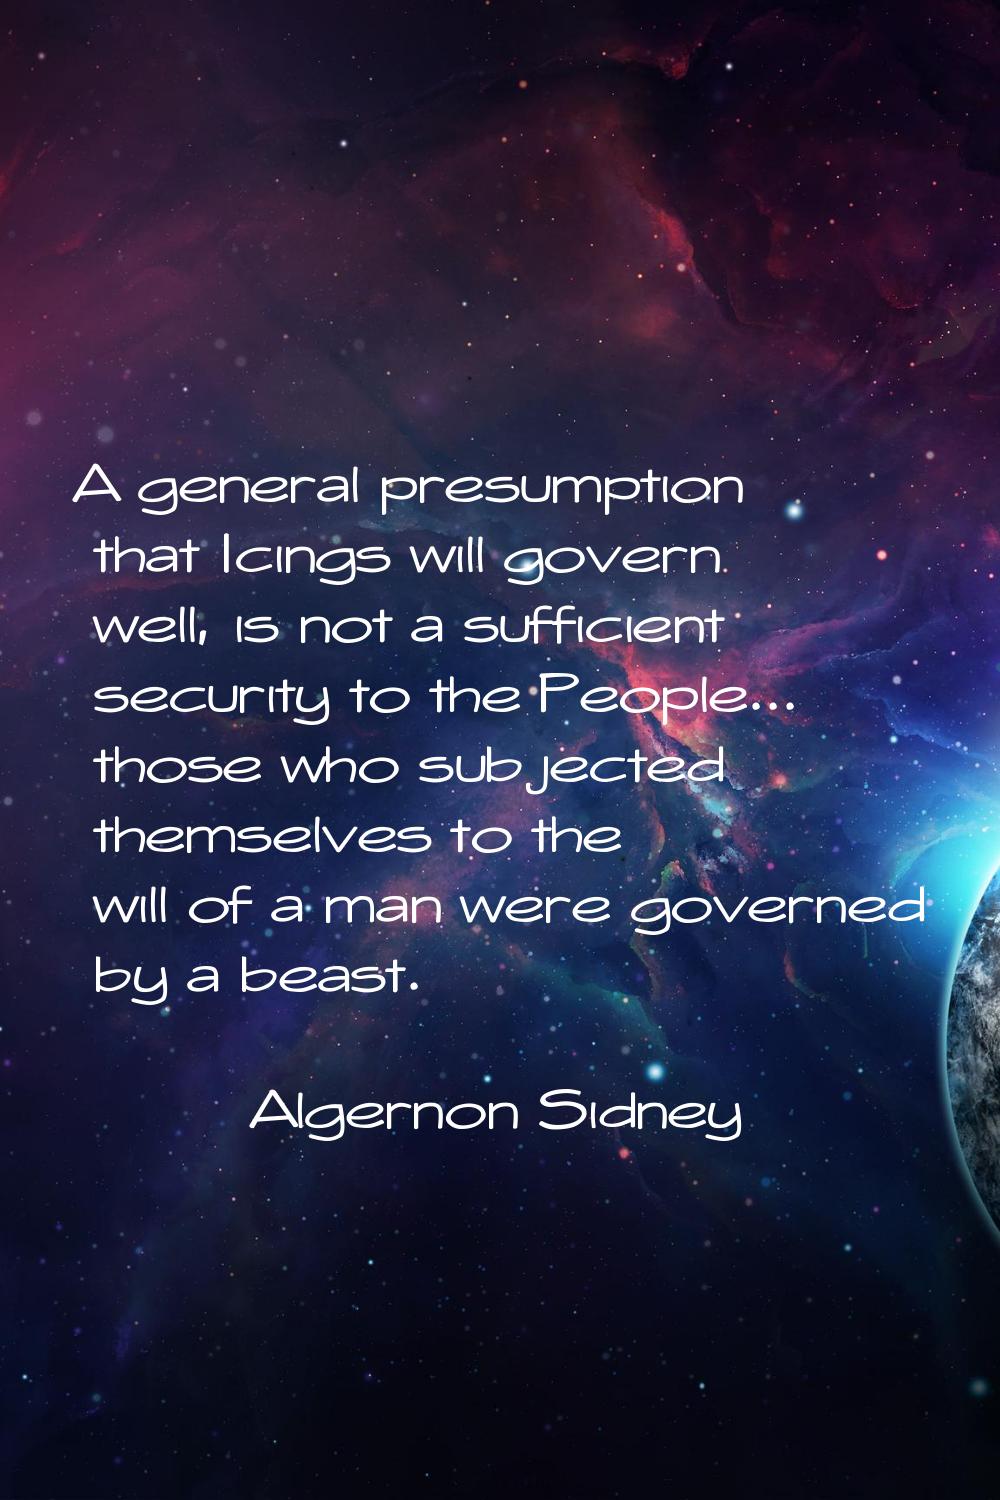 A general presumption that Icings will govern well, is not a sufficient security to the People... t